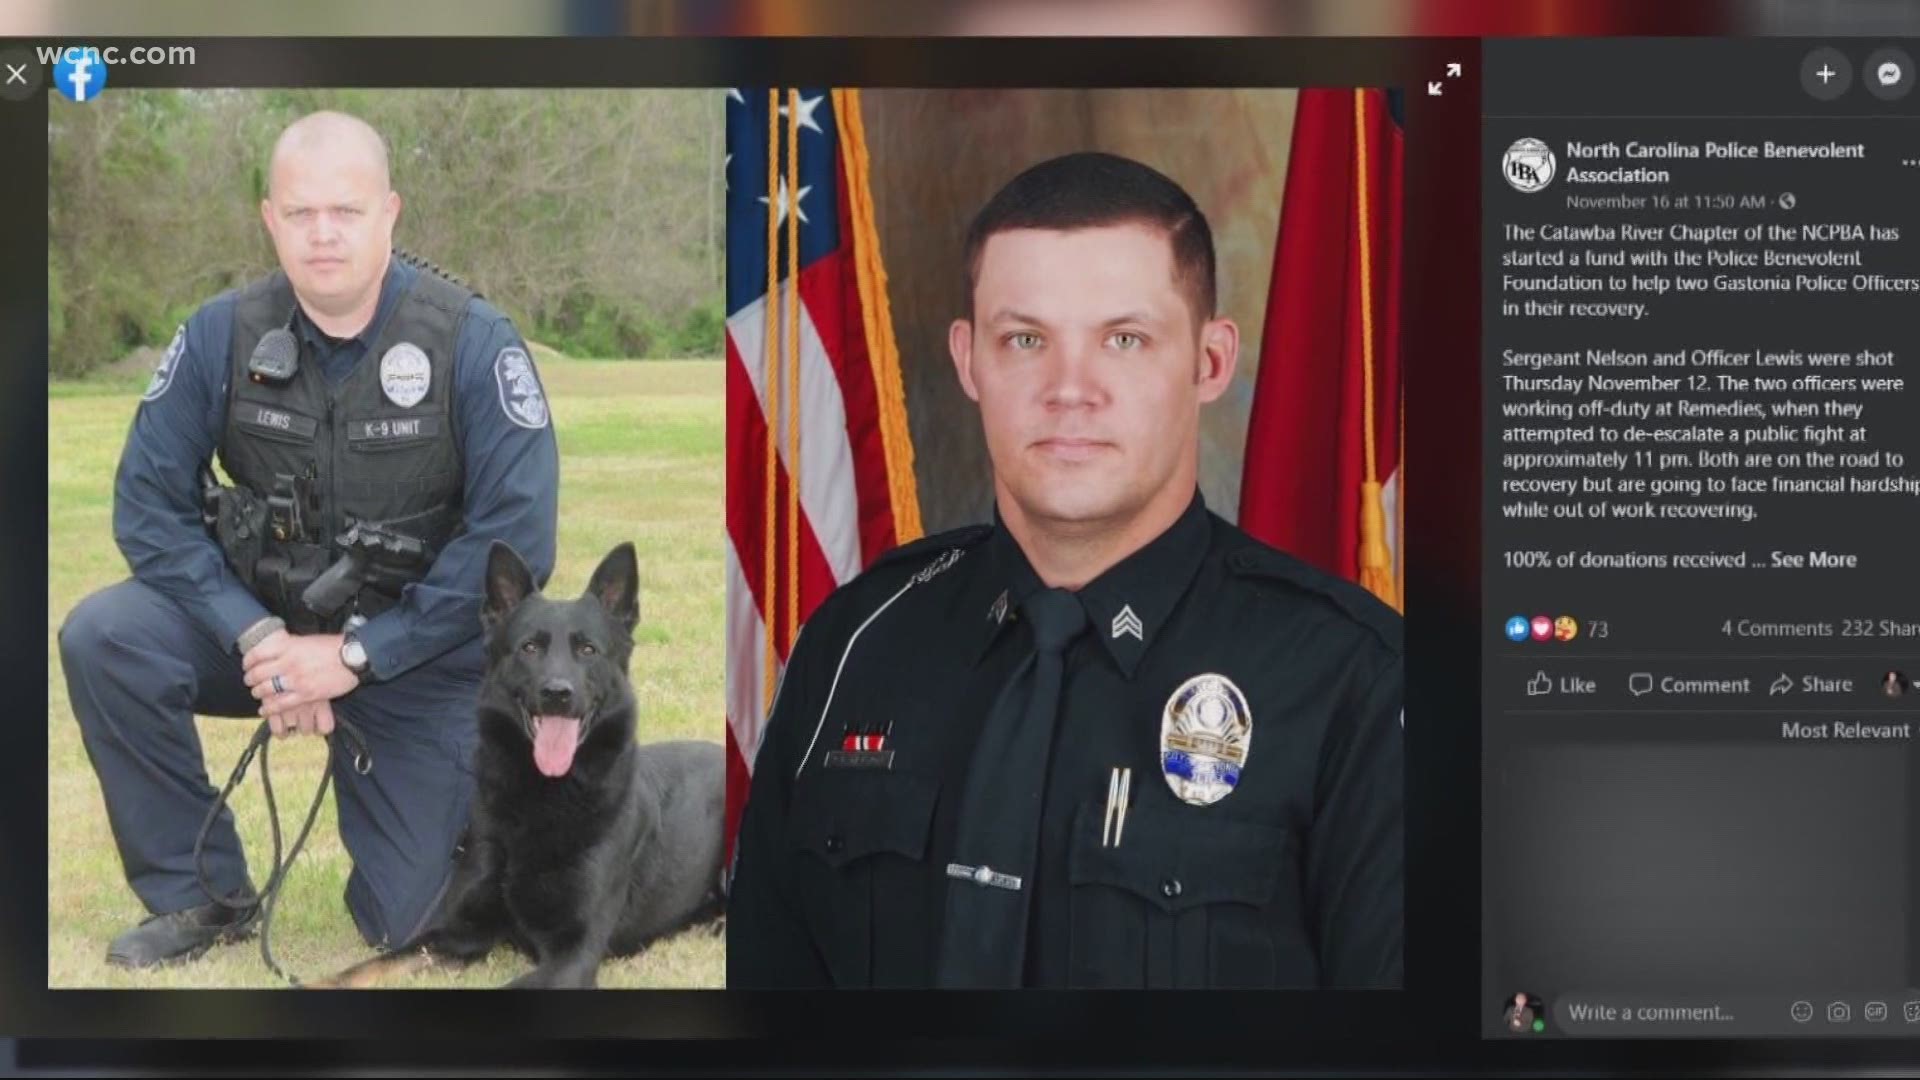 Sergeant Eric Nelson, K-9 Officer Michael Lewis and four customers were shot after a fight in the parking lot of Remedies nightclub in Gastonia.